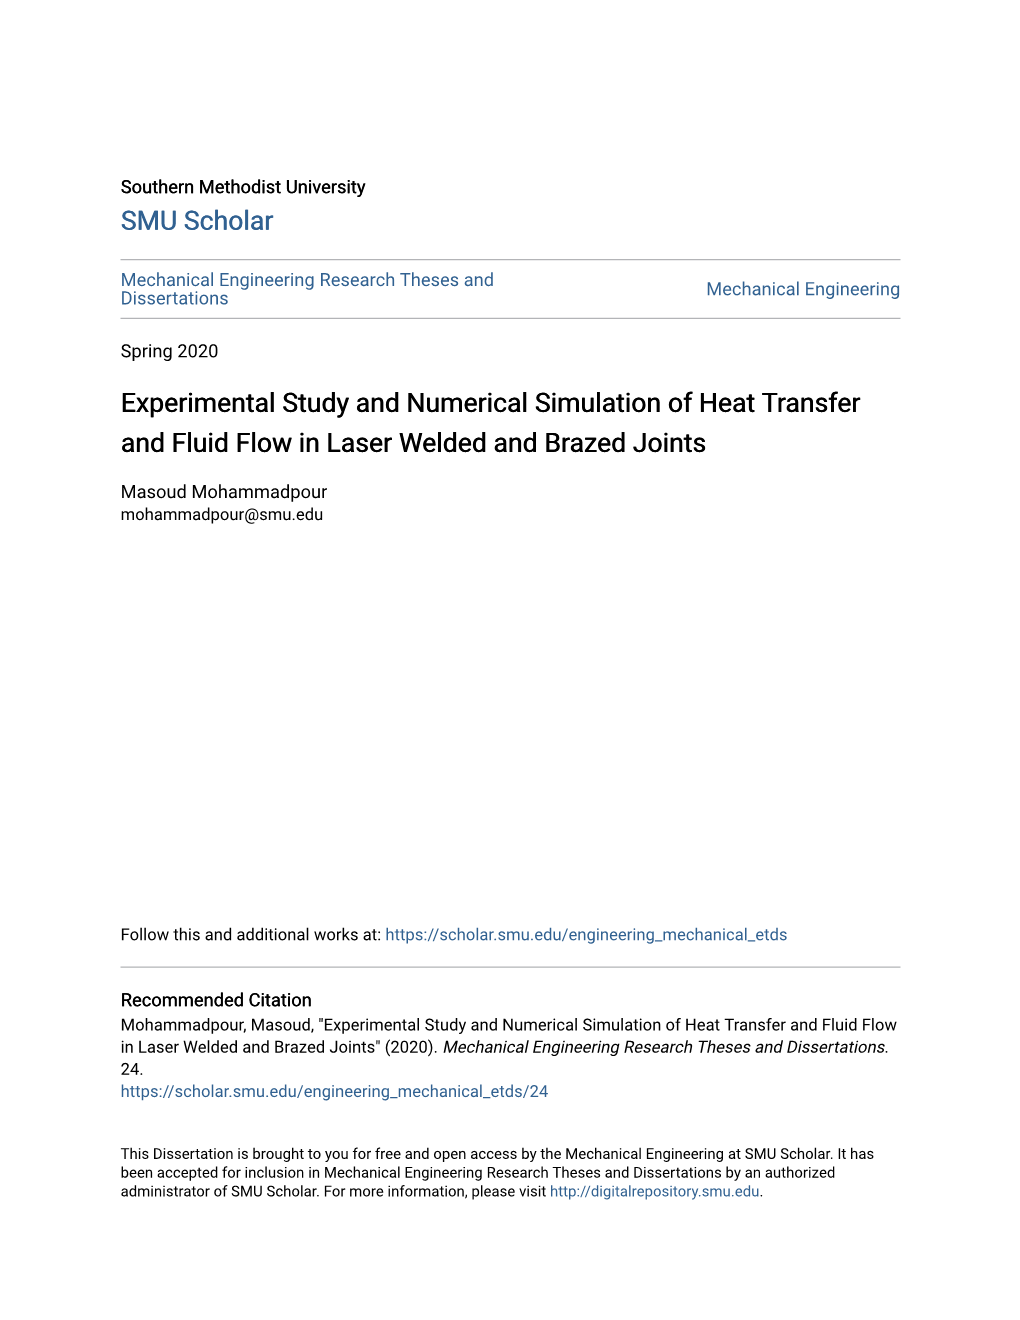 Experimental Study and Numerical Simulation of Heat Transfer and Fluid Flow in Laser Welded and Brazed Joints